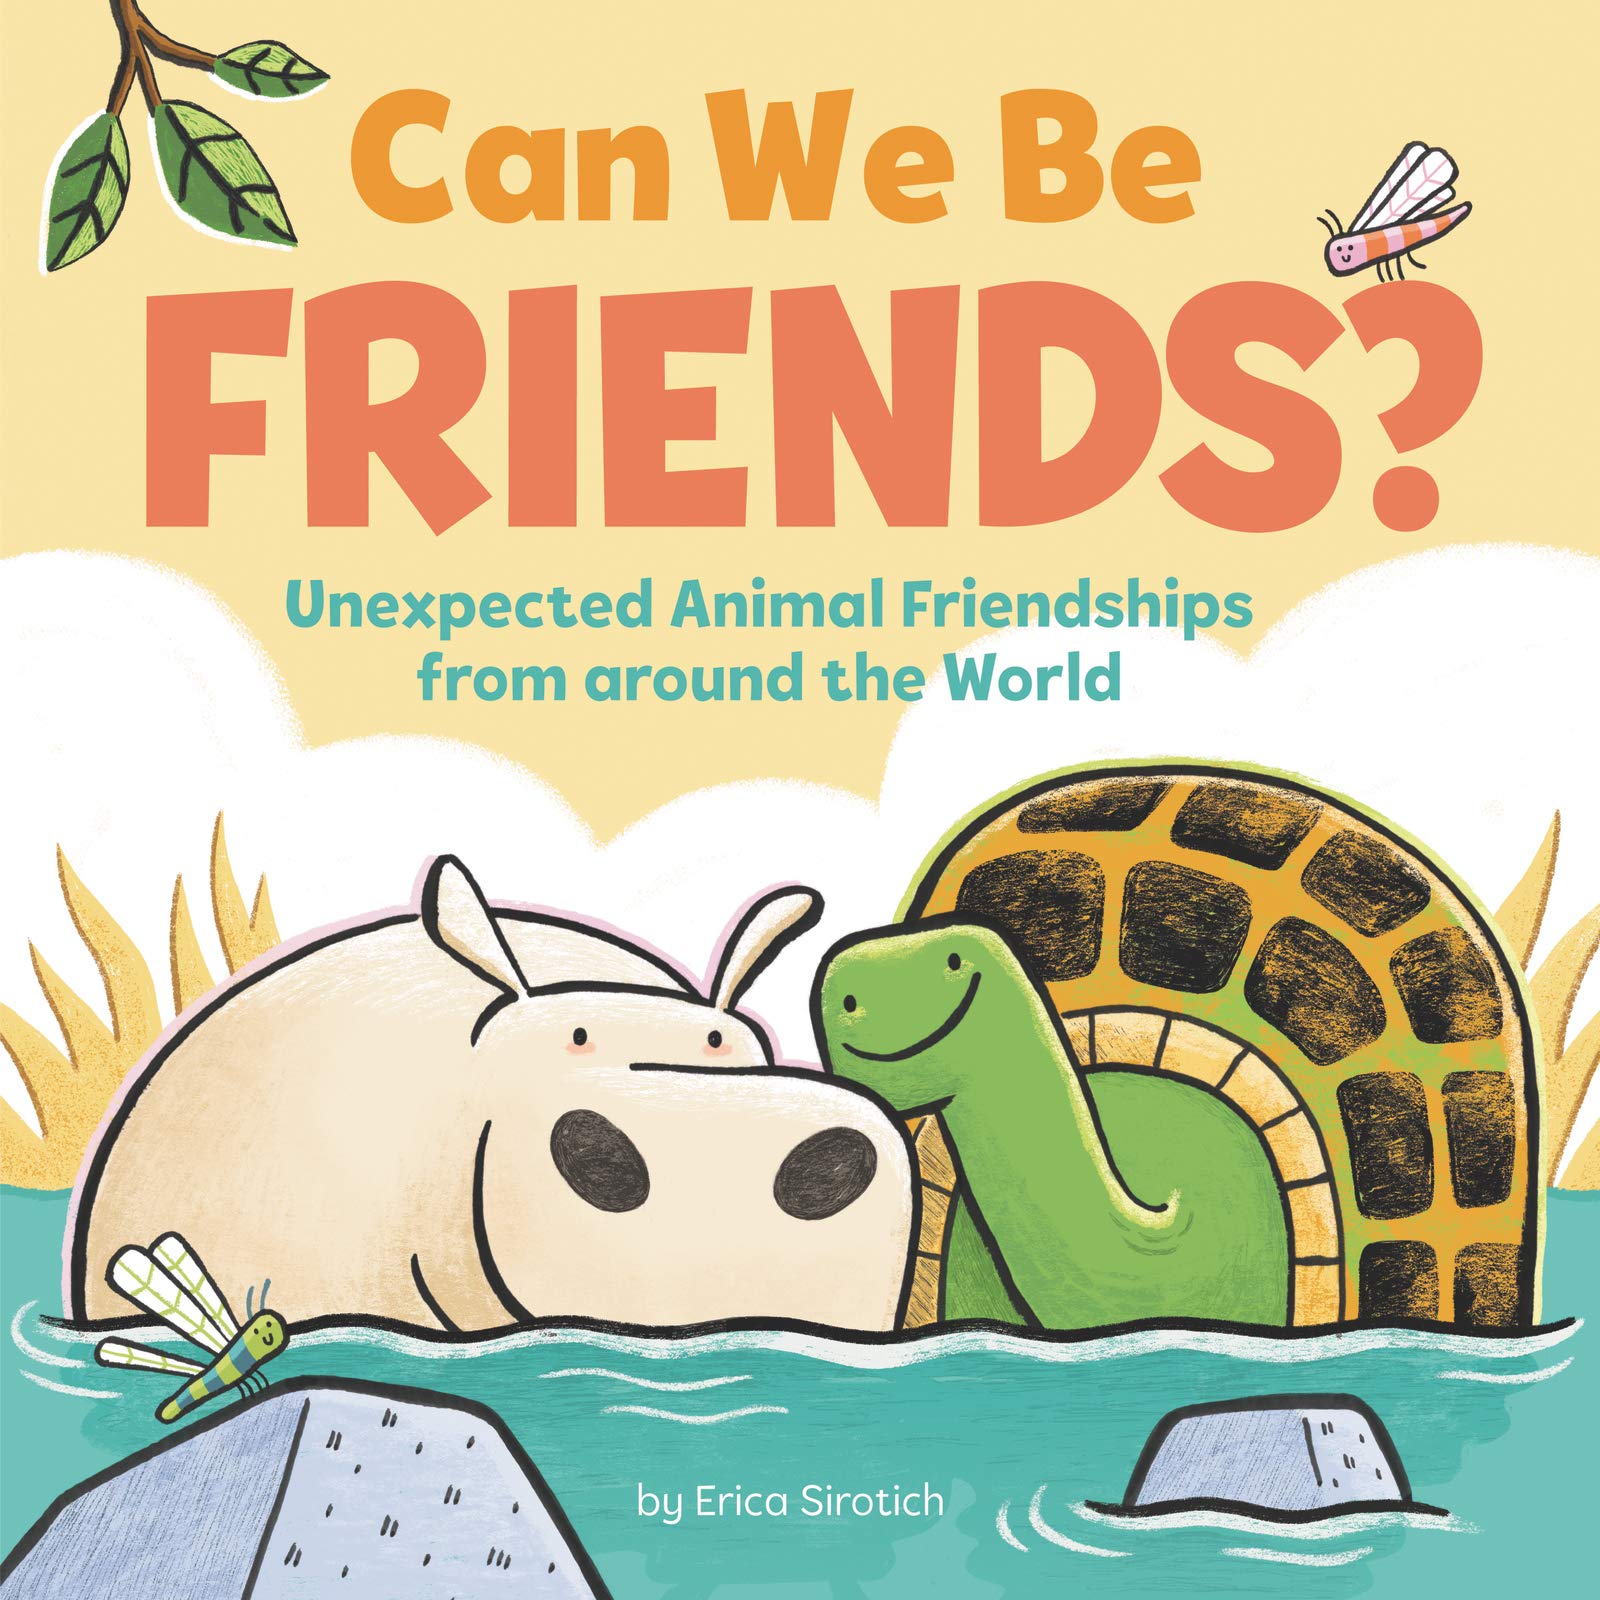 Can We Be Friends? Unexpected Animal Friendships from Around the World